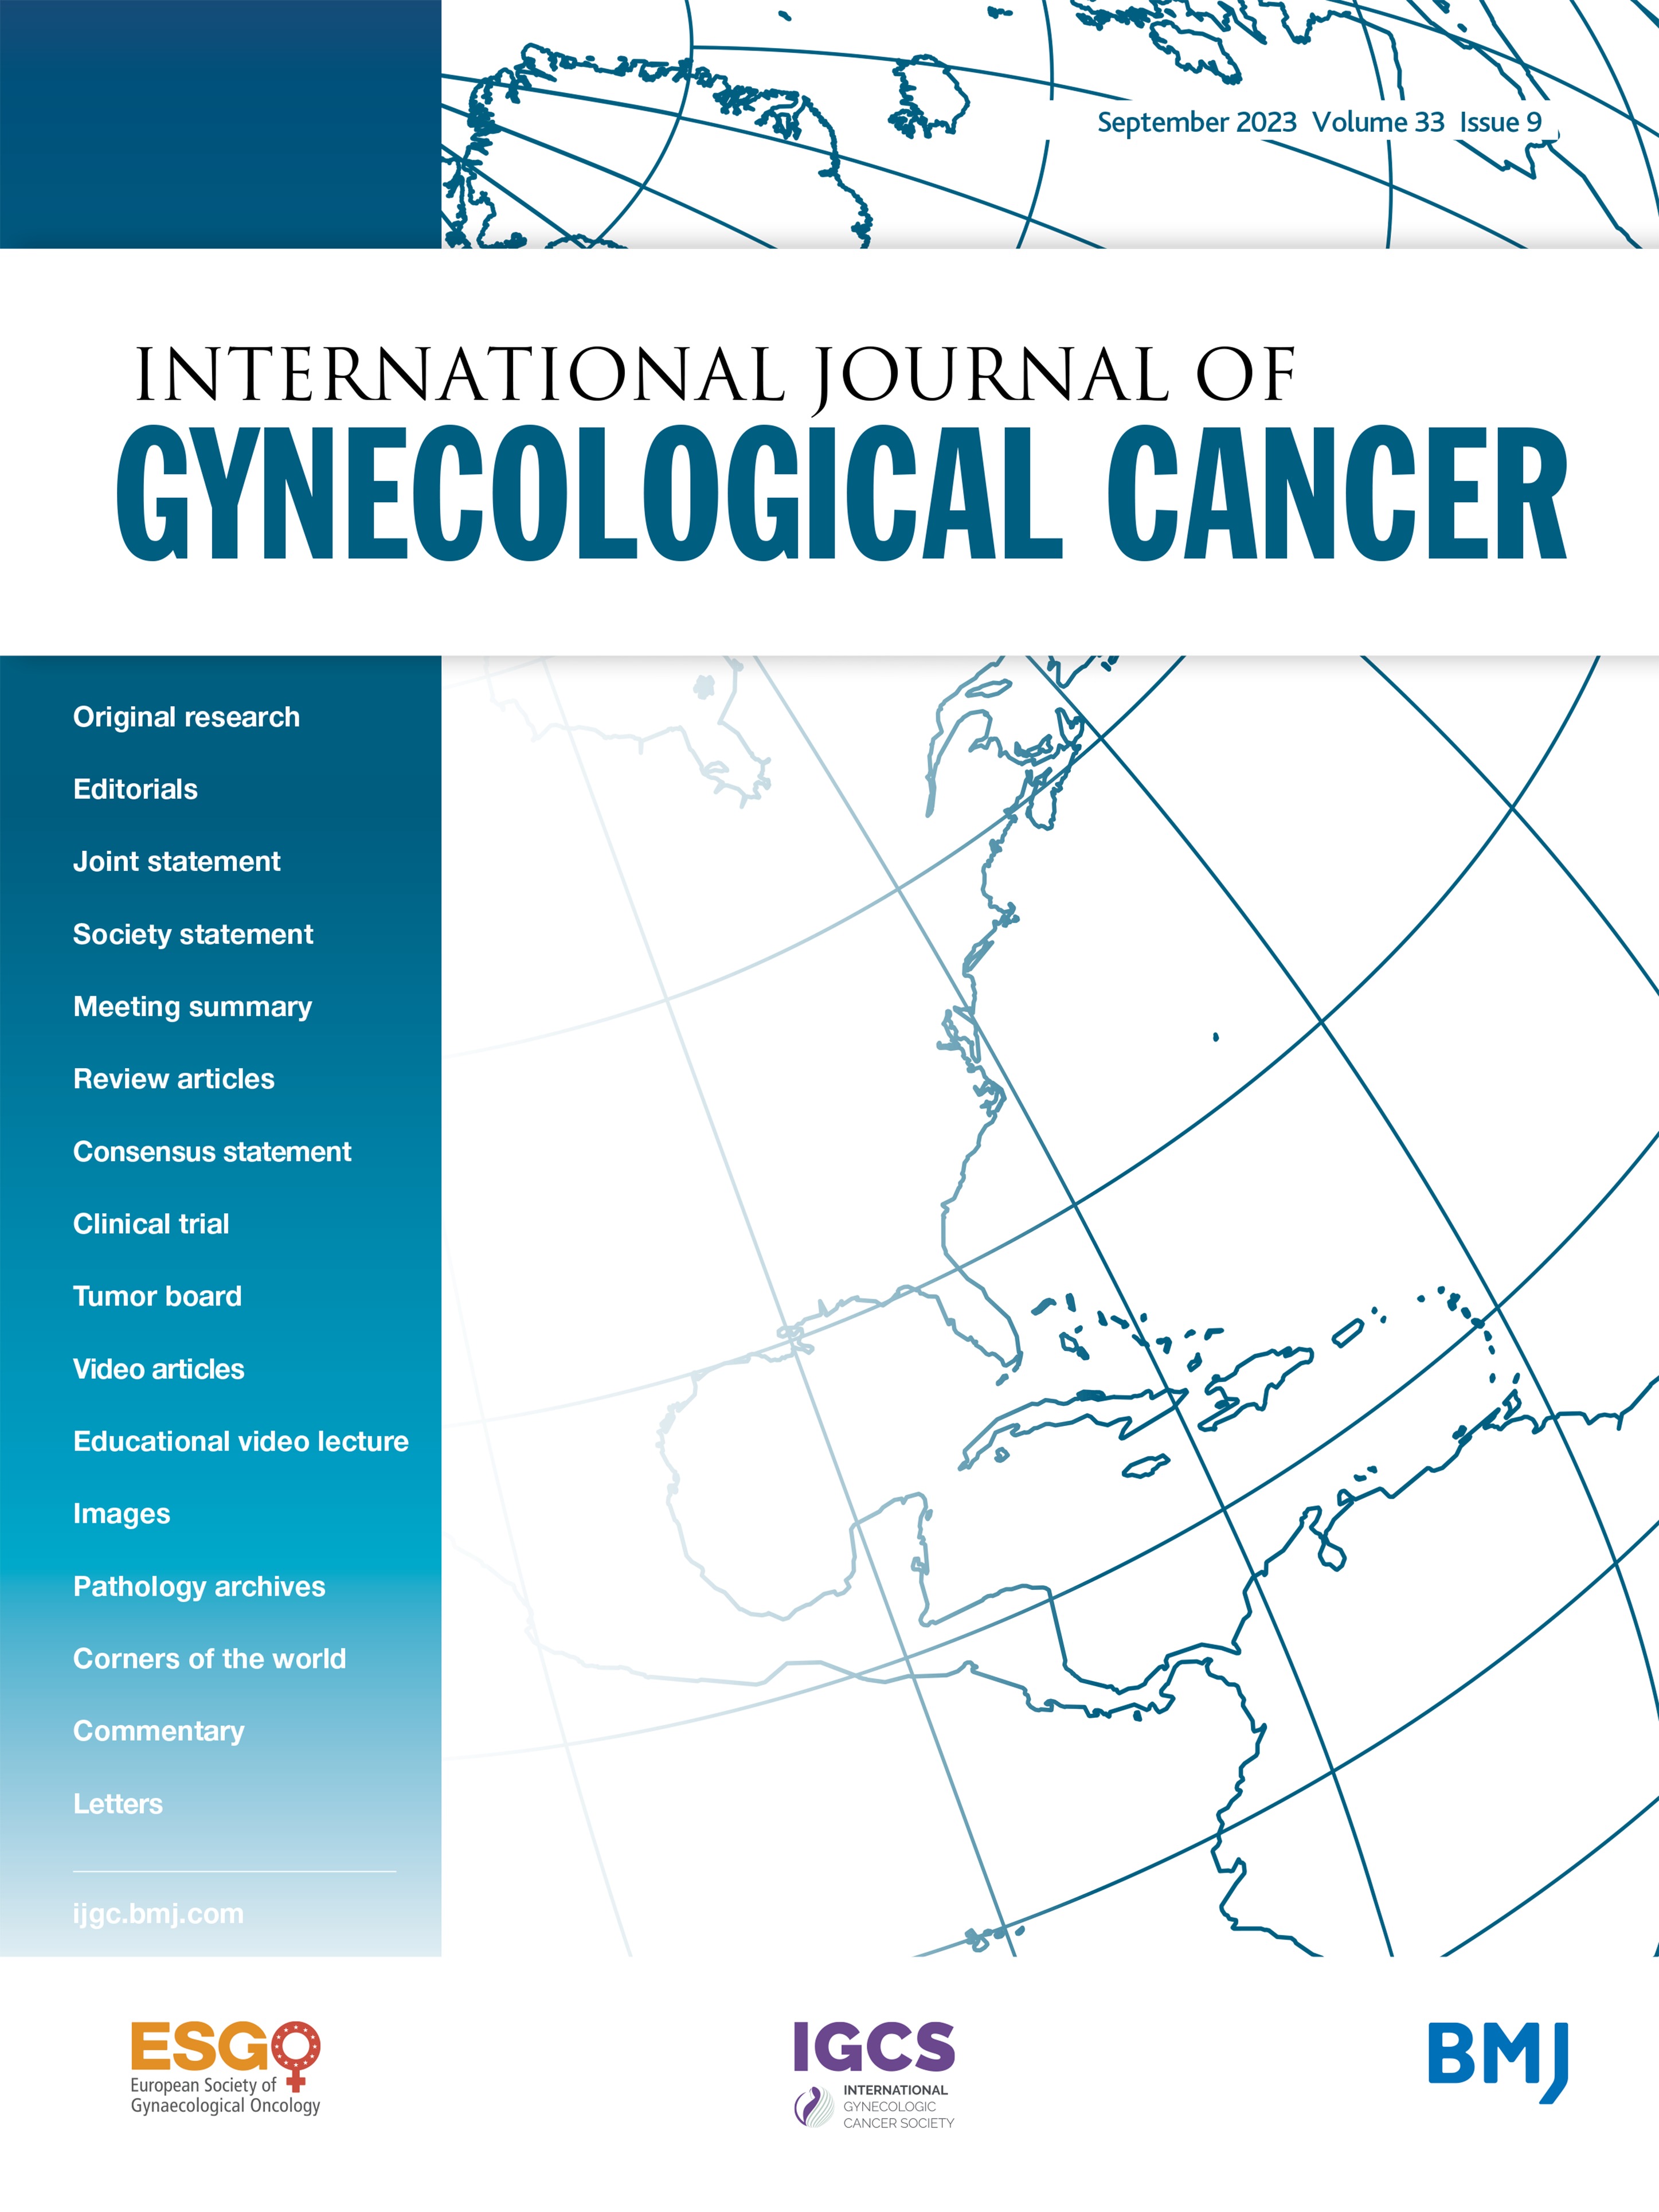 Surveillance imaging for salvage therapy in endometrial cancer